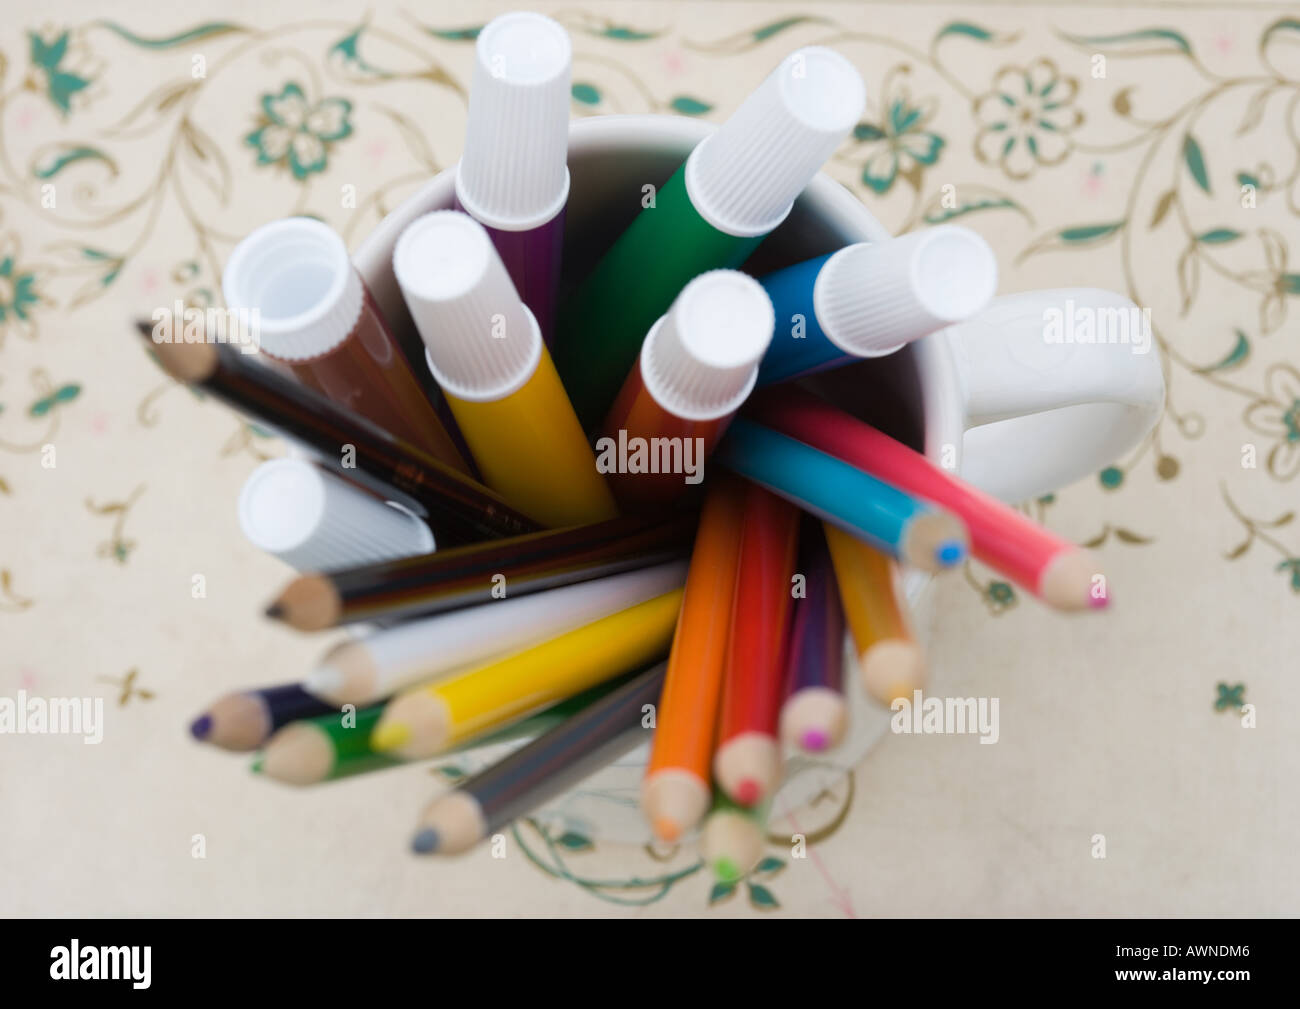 Mug full of colored pencils and markers, high angle view Stock Photo